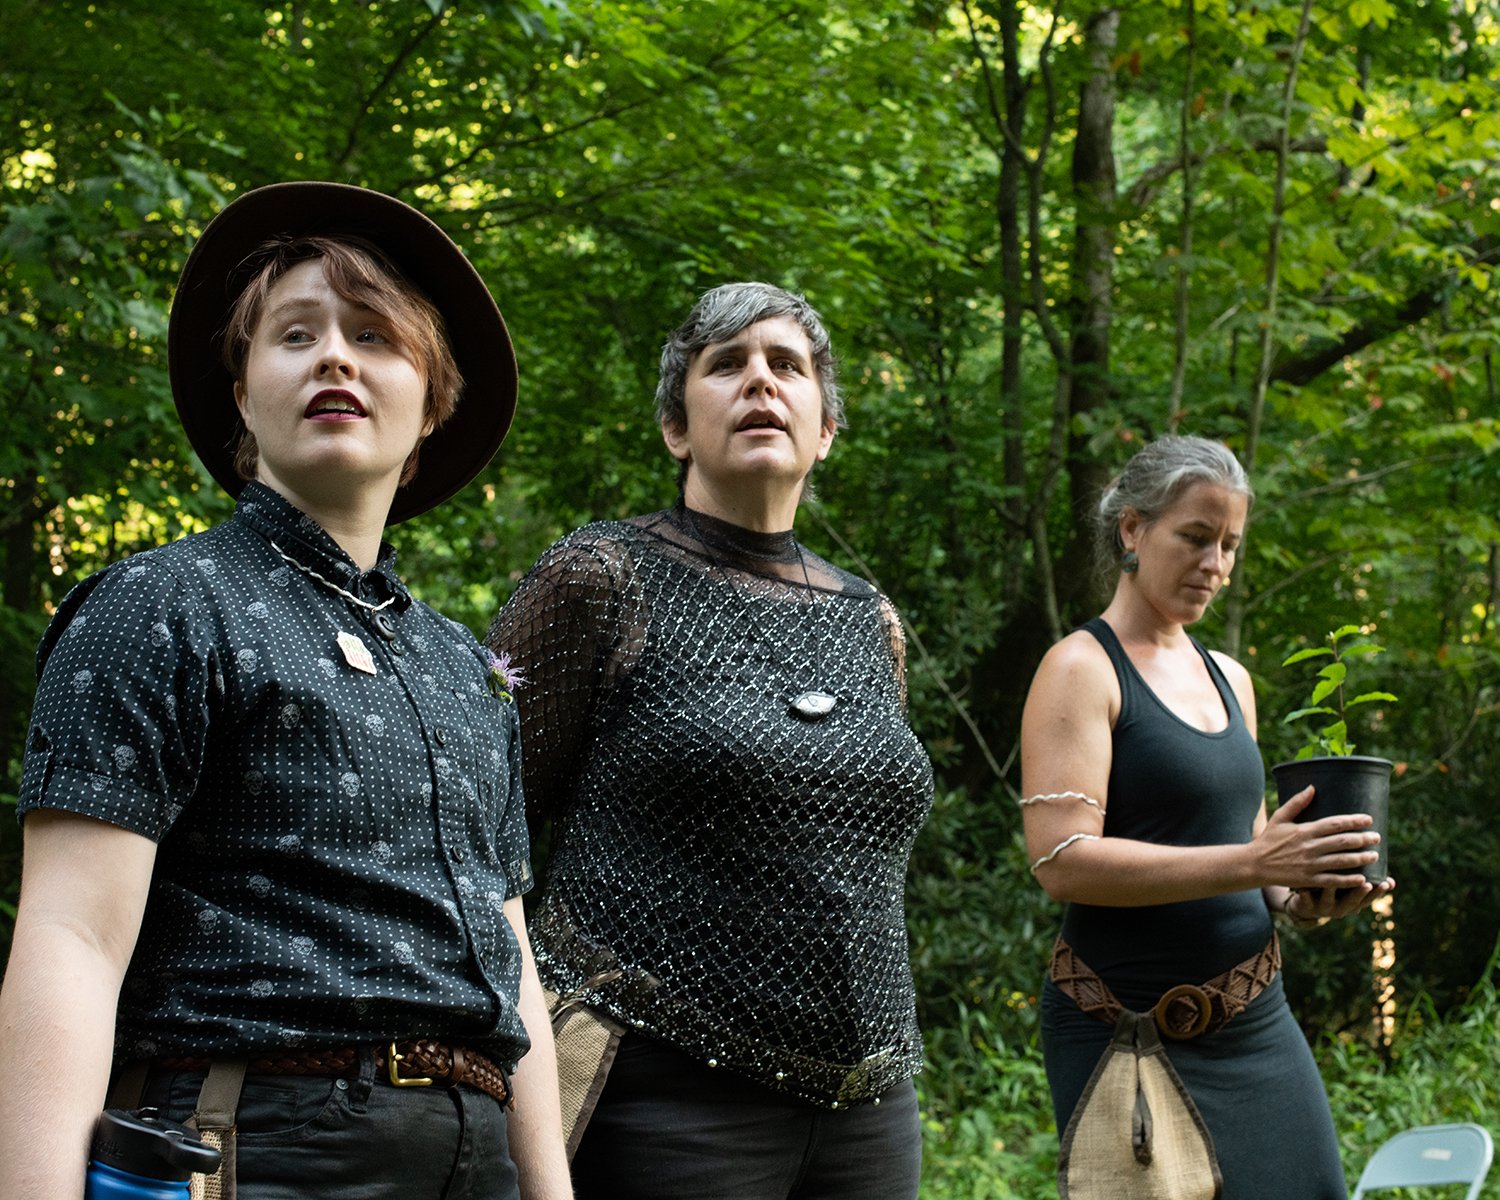  Singers &amp; guides of Ezell: Ballad of a Land Man. Clarity Hagan, Nicole Garneau, and Carrie Brunk, July 2021 at Pine Mountain Settlement School. Photo: Will Major. 